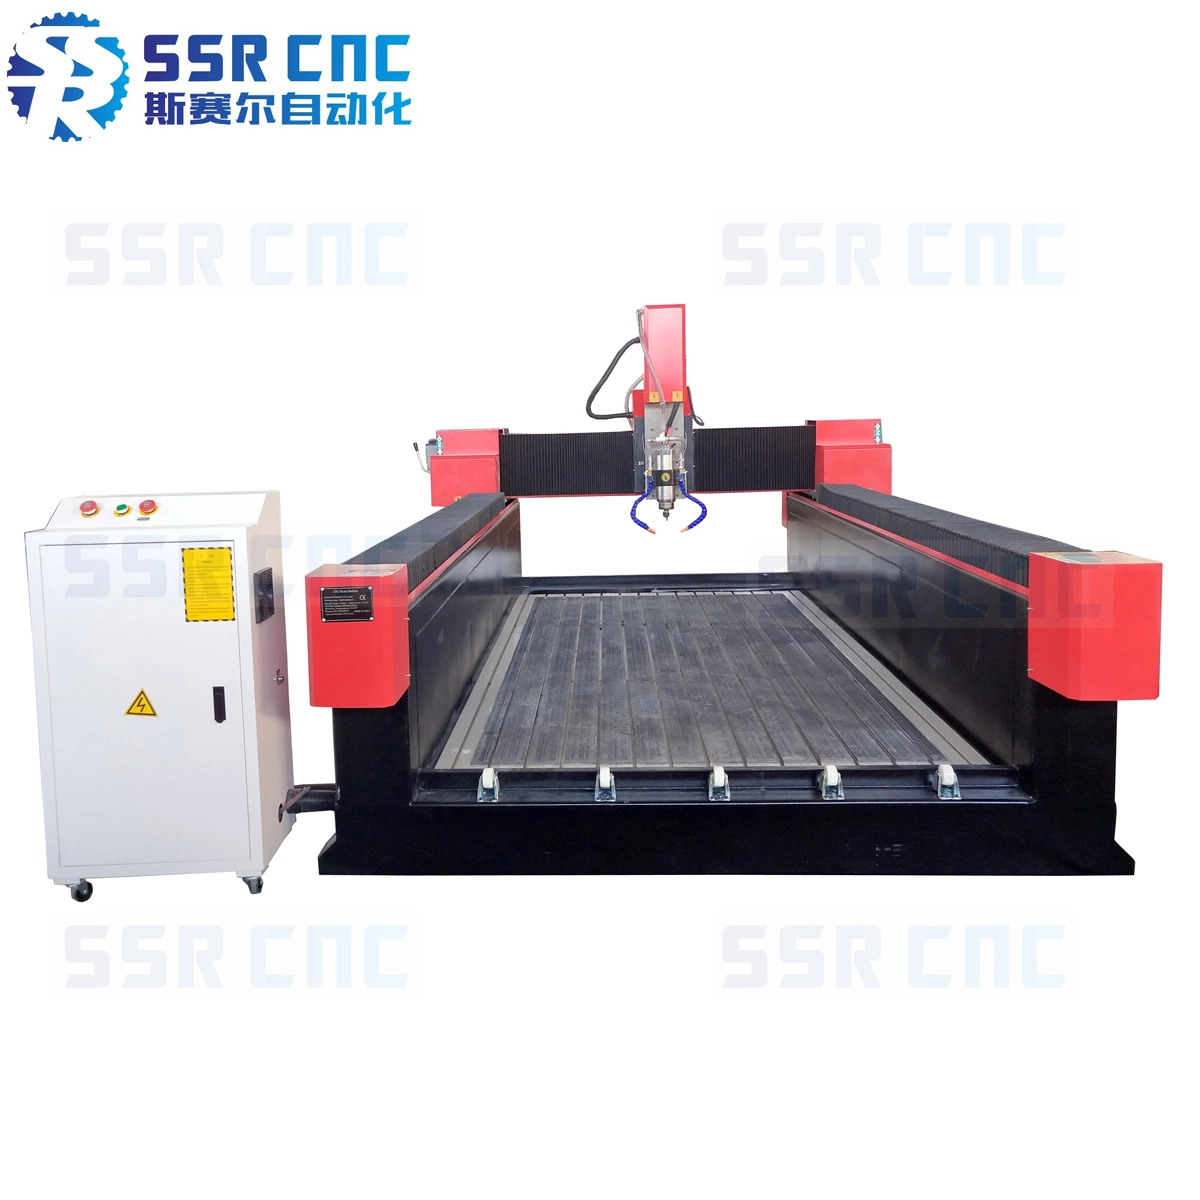 China CNC Machine for Marble Carving Popular in Tombstone Processing Industry